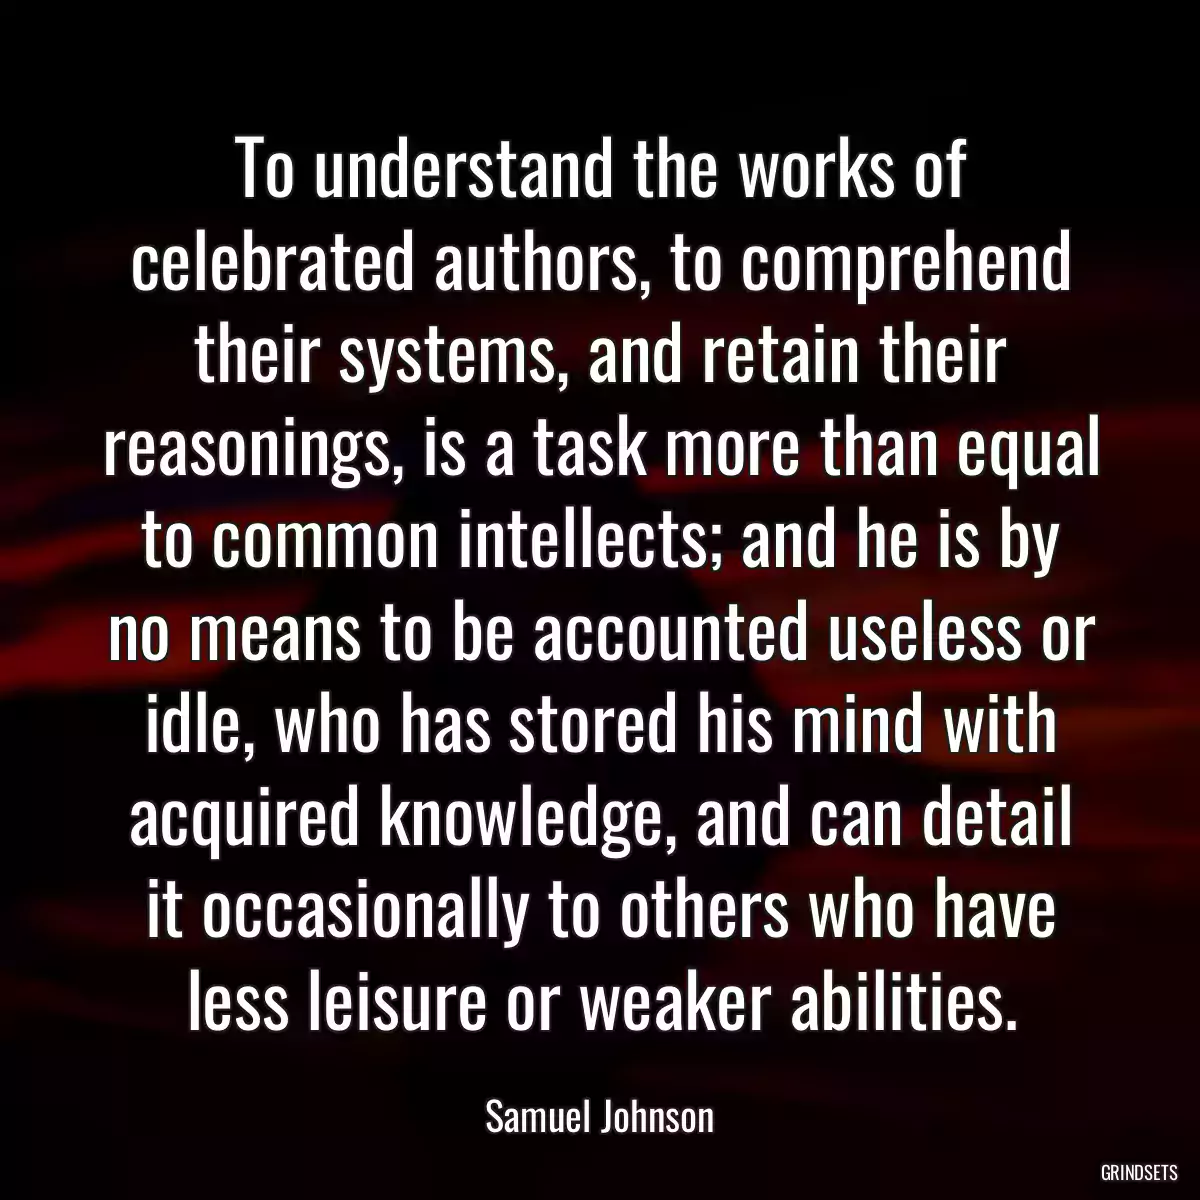 To understand the works of celebrated authors, to comprehend their systems, and retain their reasonings, is a task more than equal to common intellects; and he is by no means to be accounted useless or idle, who has stored his mind with acquired knowledge, and can detail it occasionally to others who have less leisure or weaker abilities.